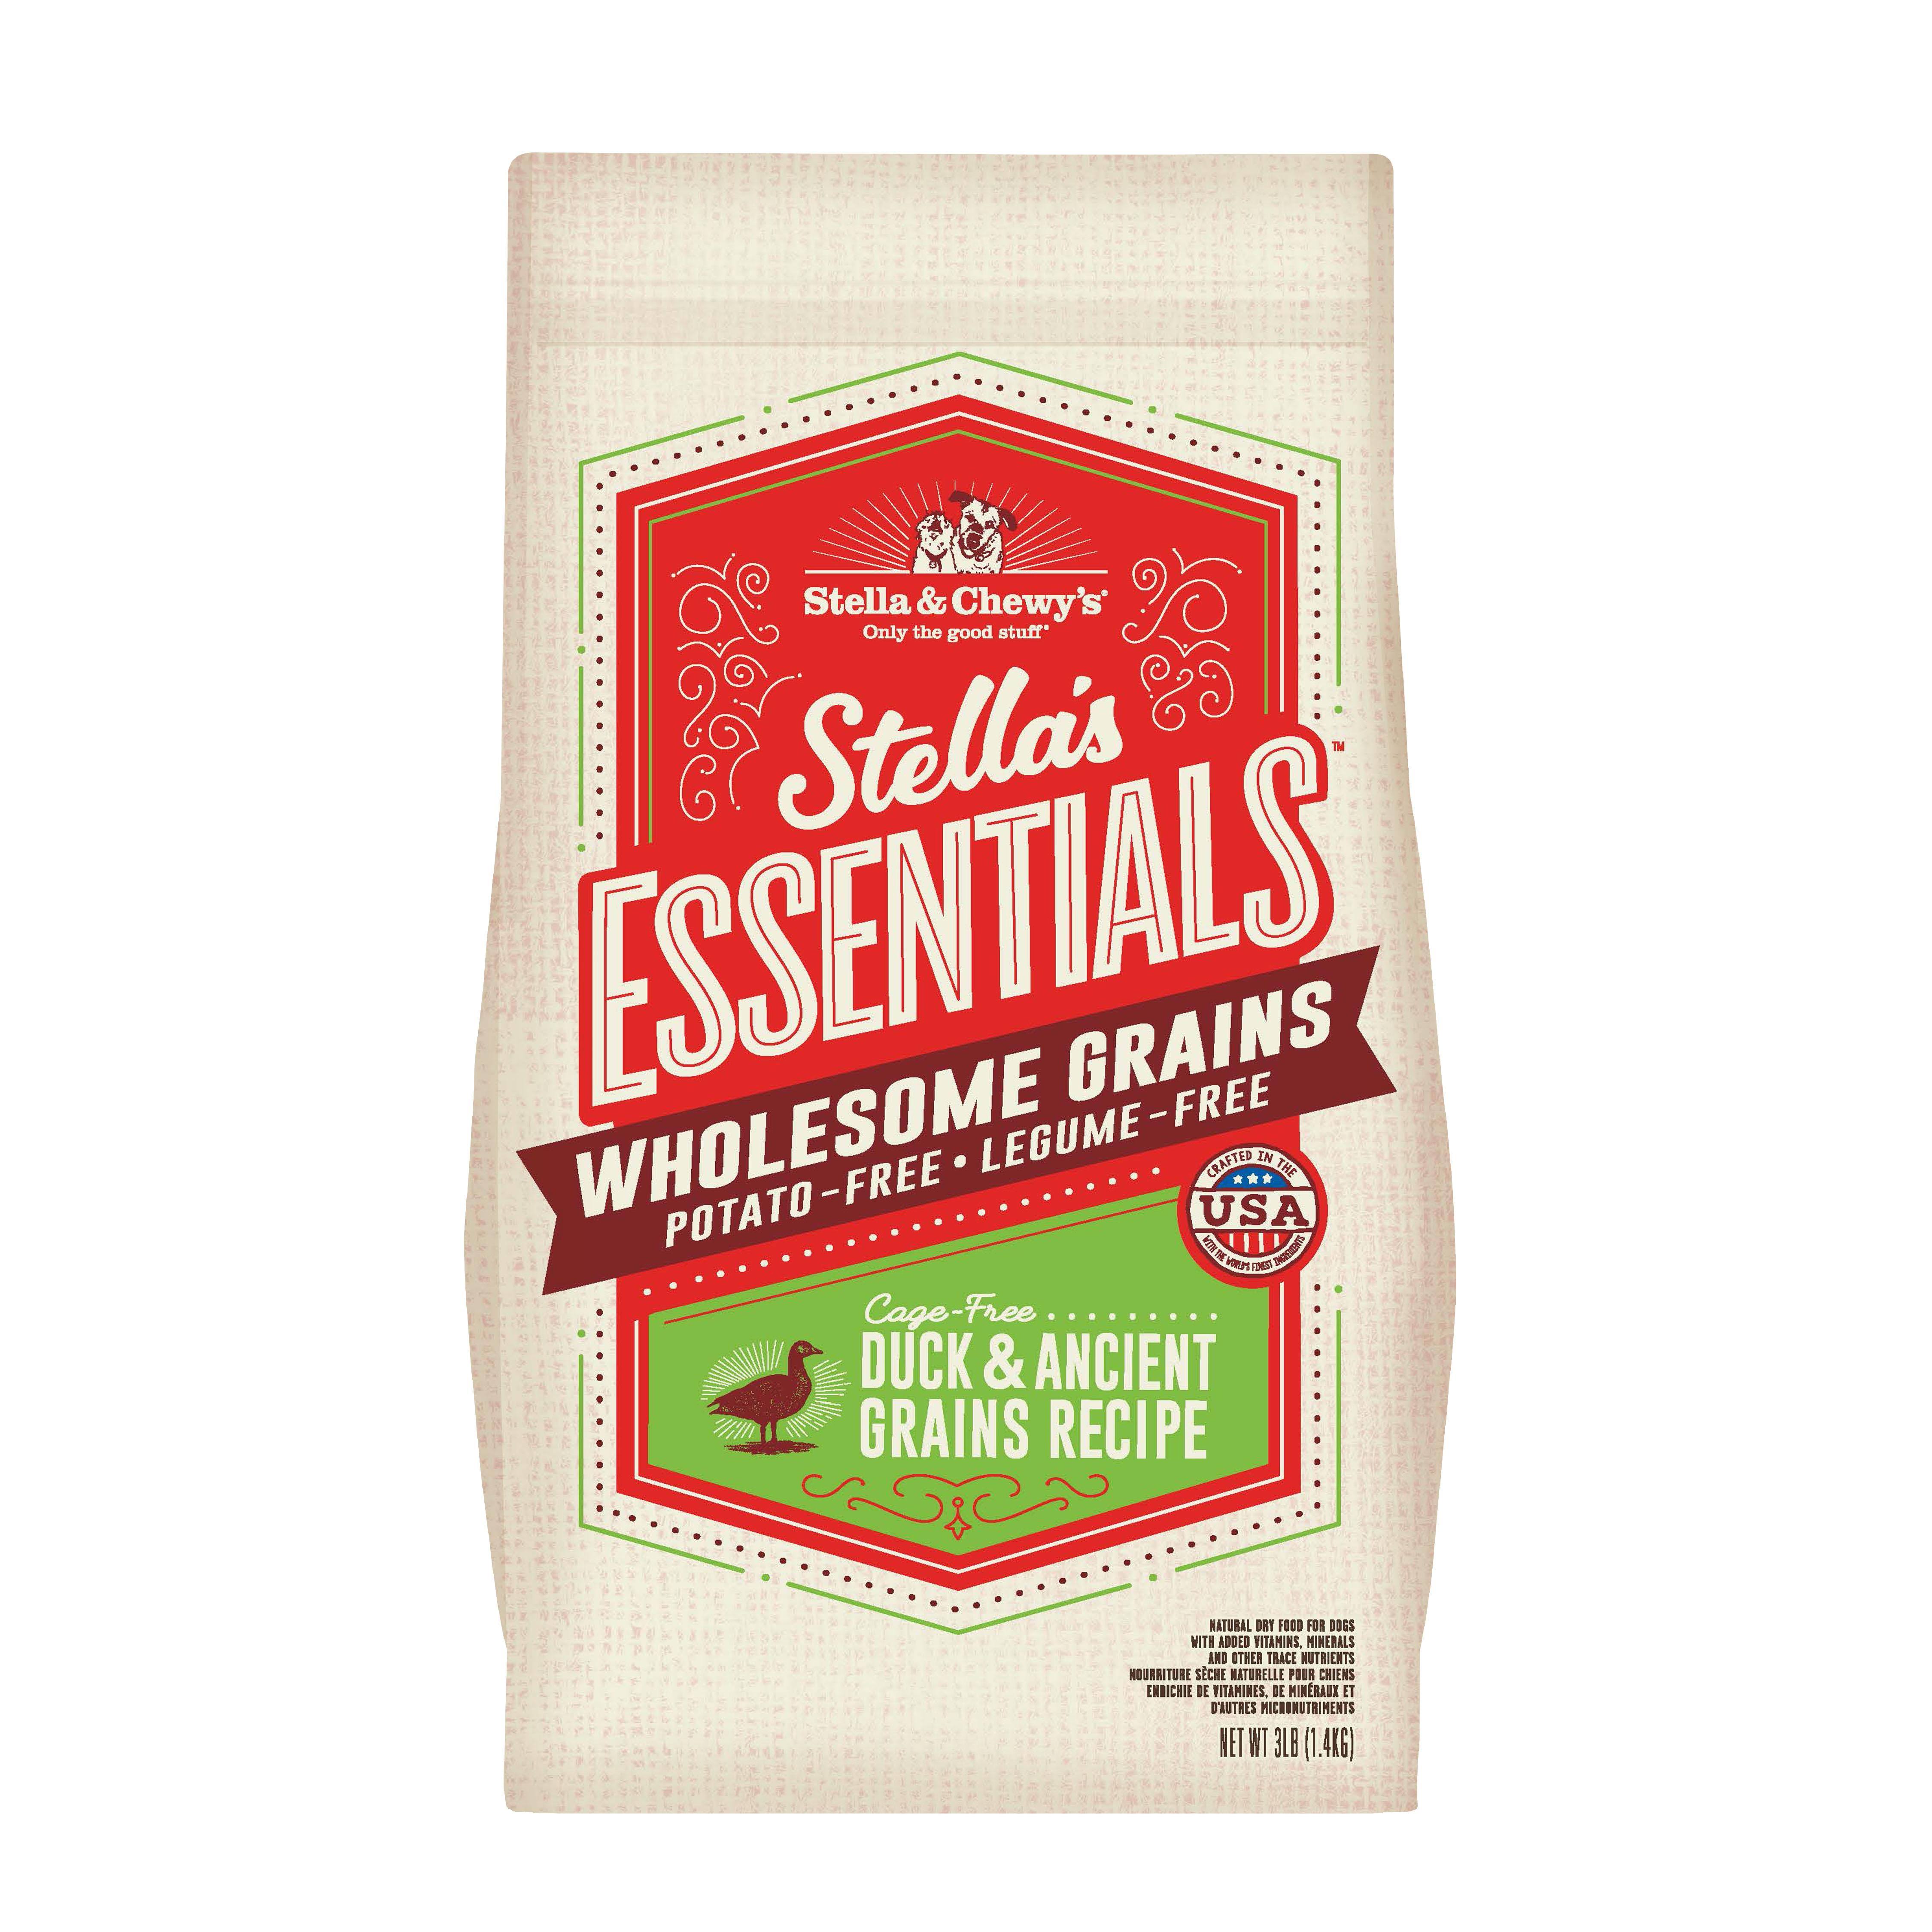 Stella & Chewy's Essentials Cage-Free Duck & Ancient Grains Recipe Dog Food - 3-Lbs.